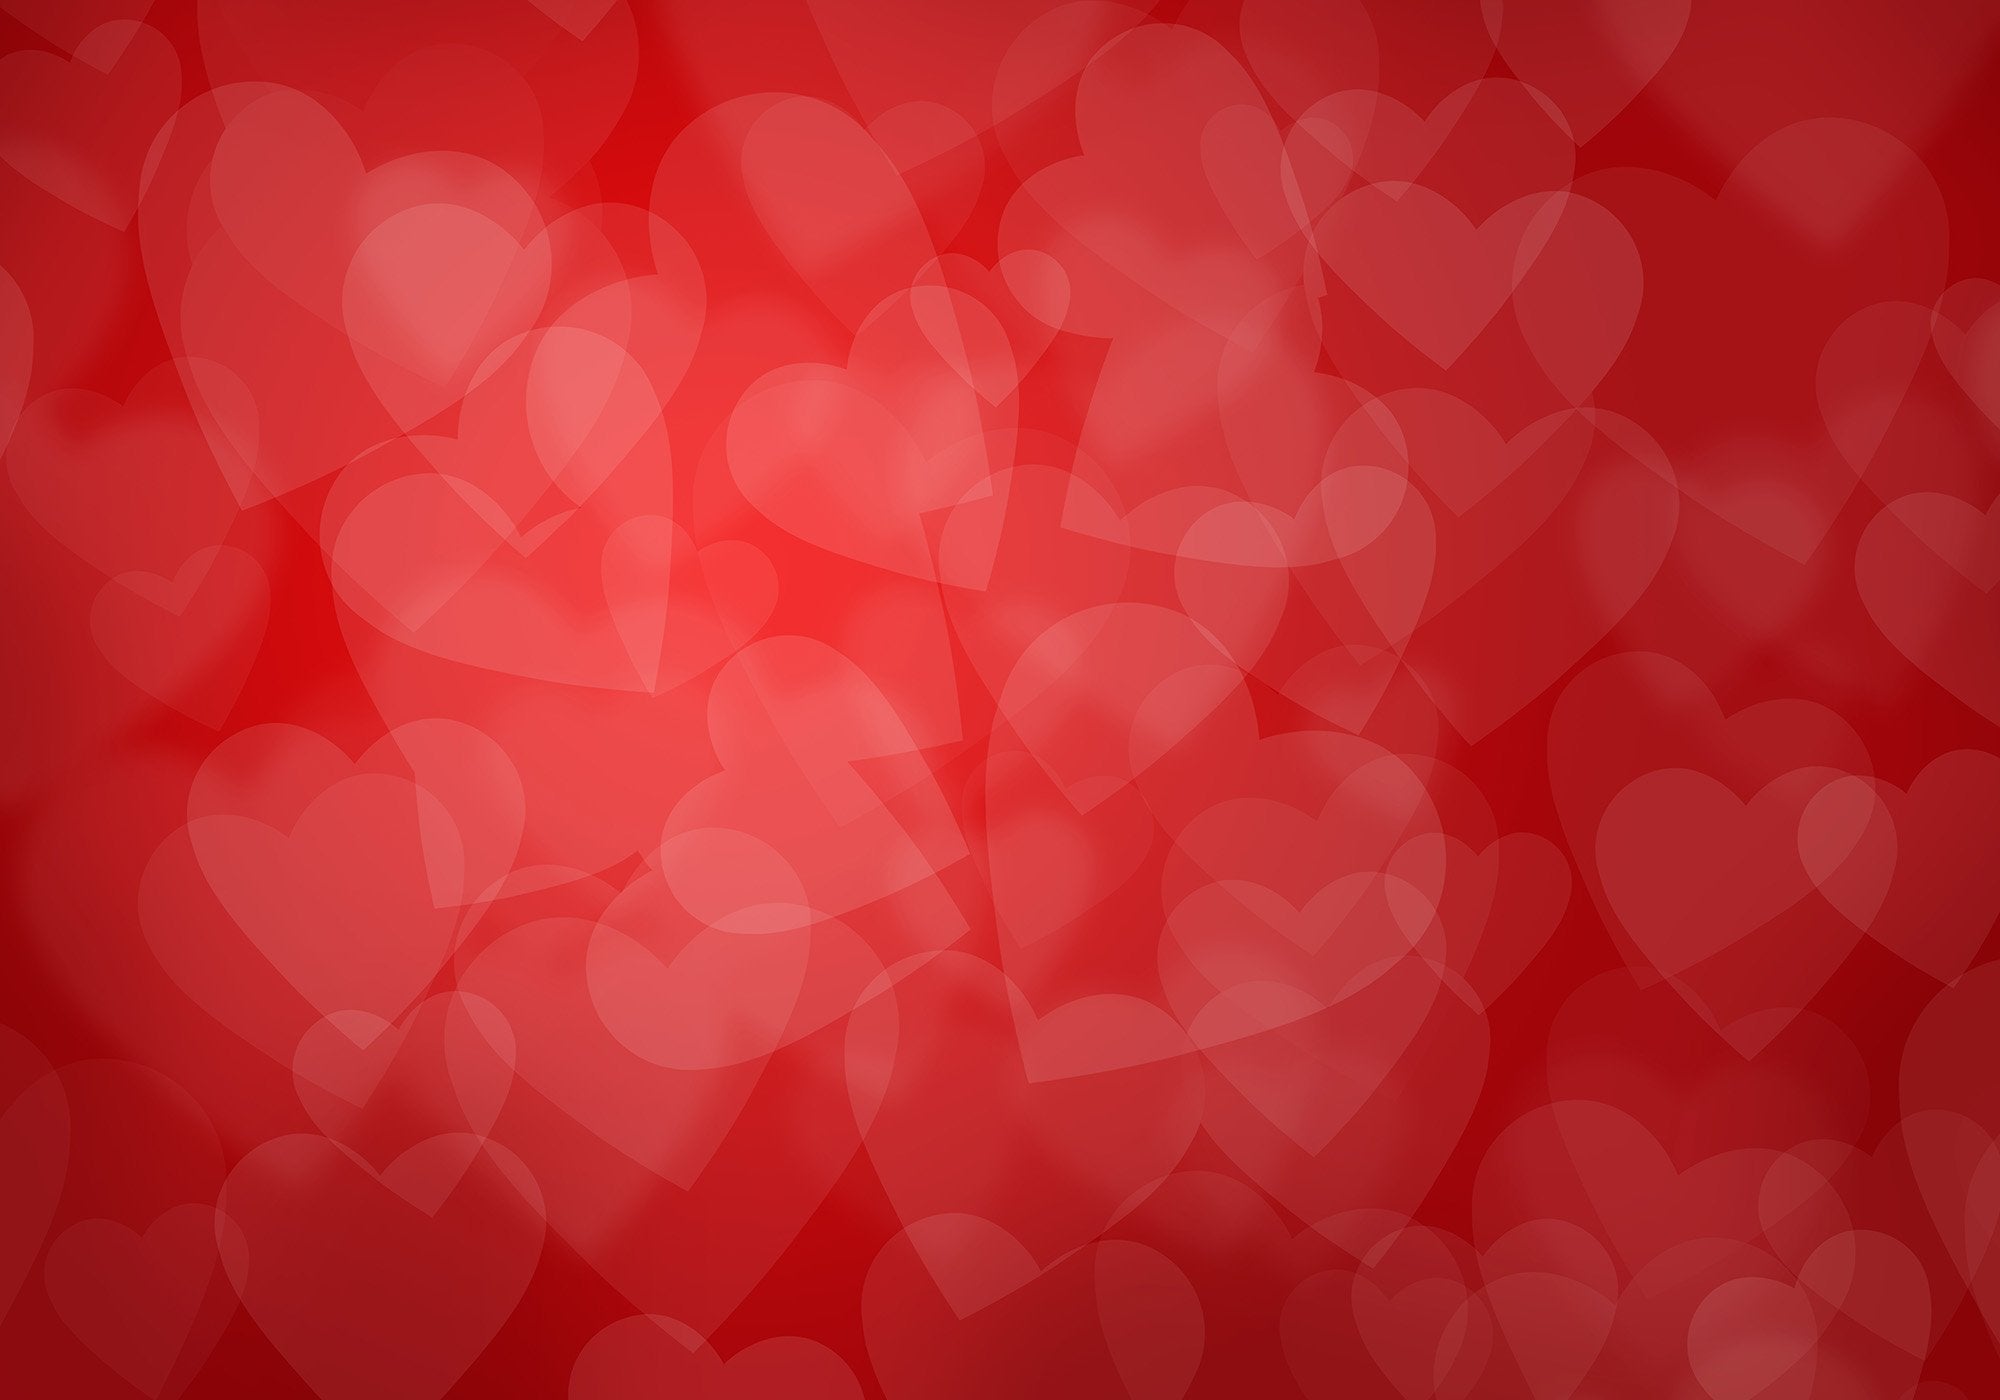 Bokeh Hearts Printed On Red Background For Love Couple Photography Backdrop Shopbackdrop